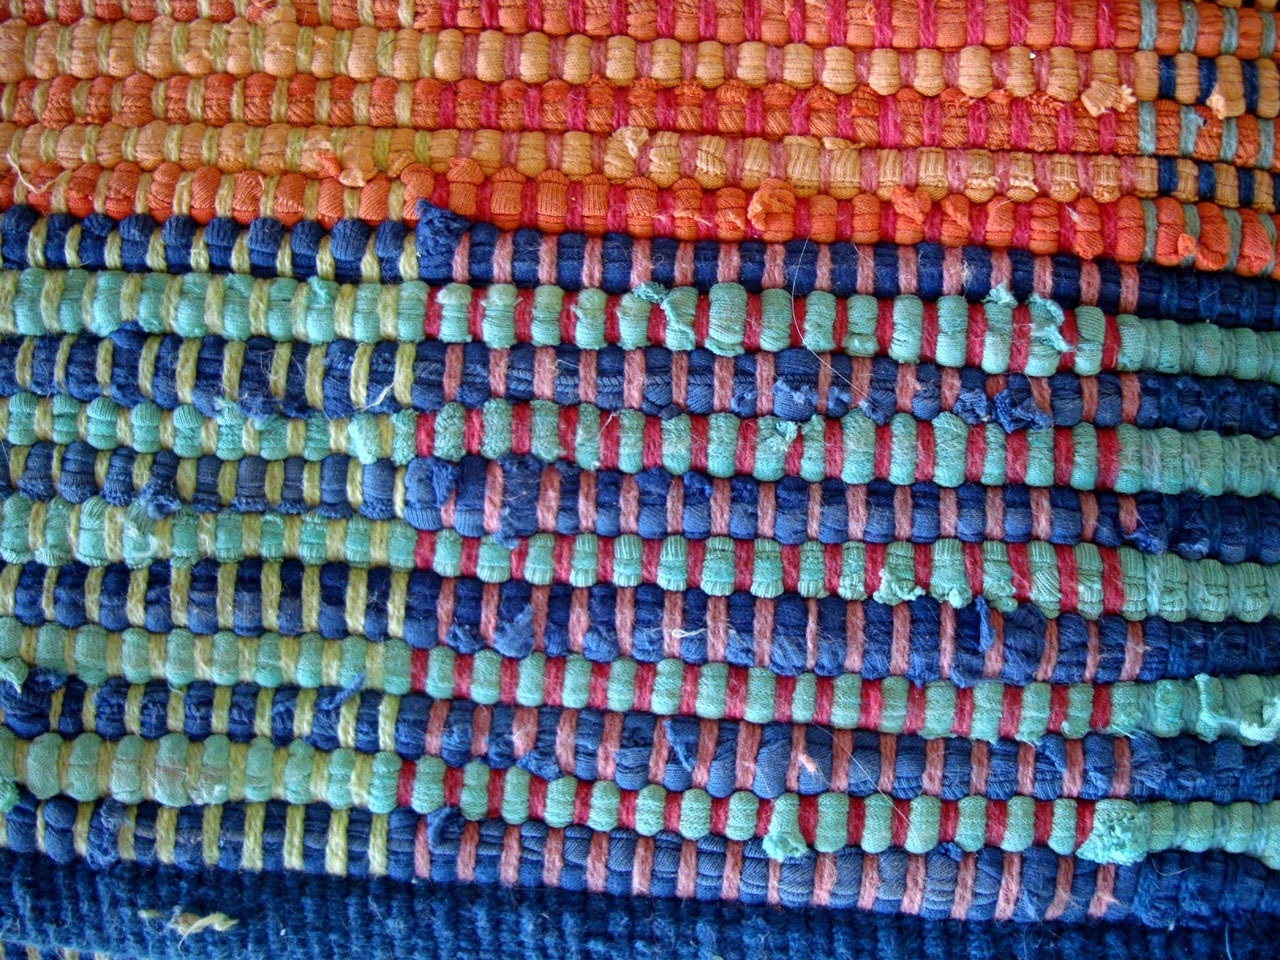 teal, blue and orange knitted textile